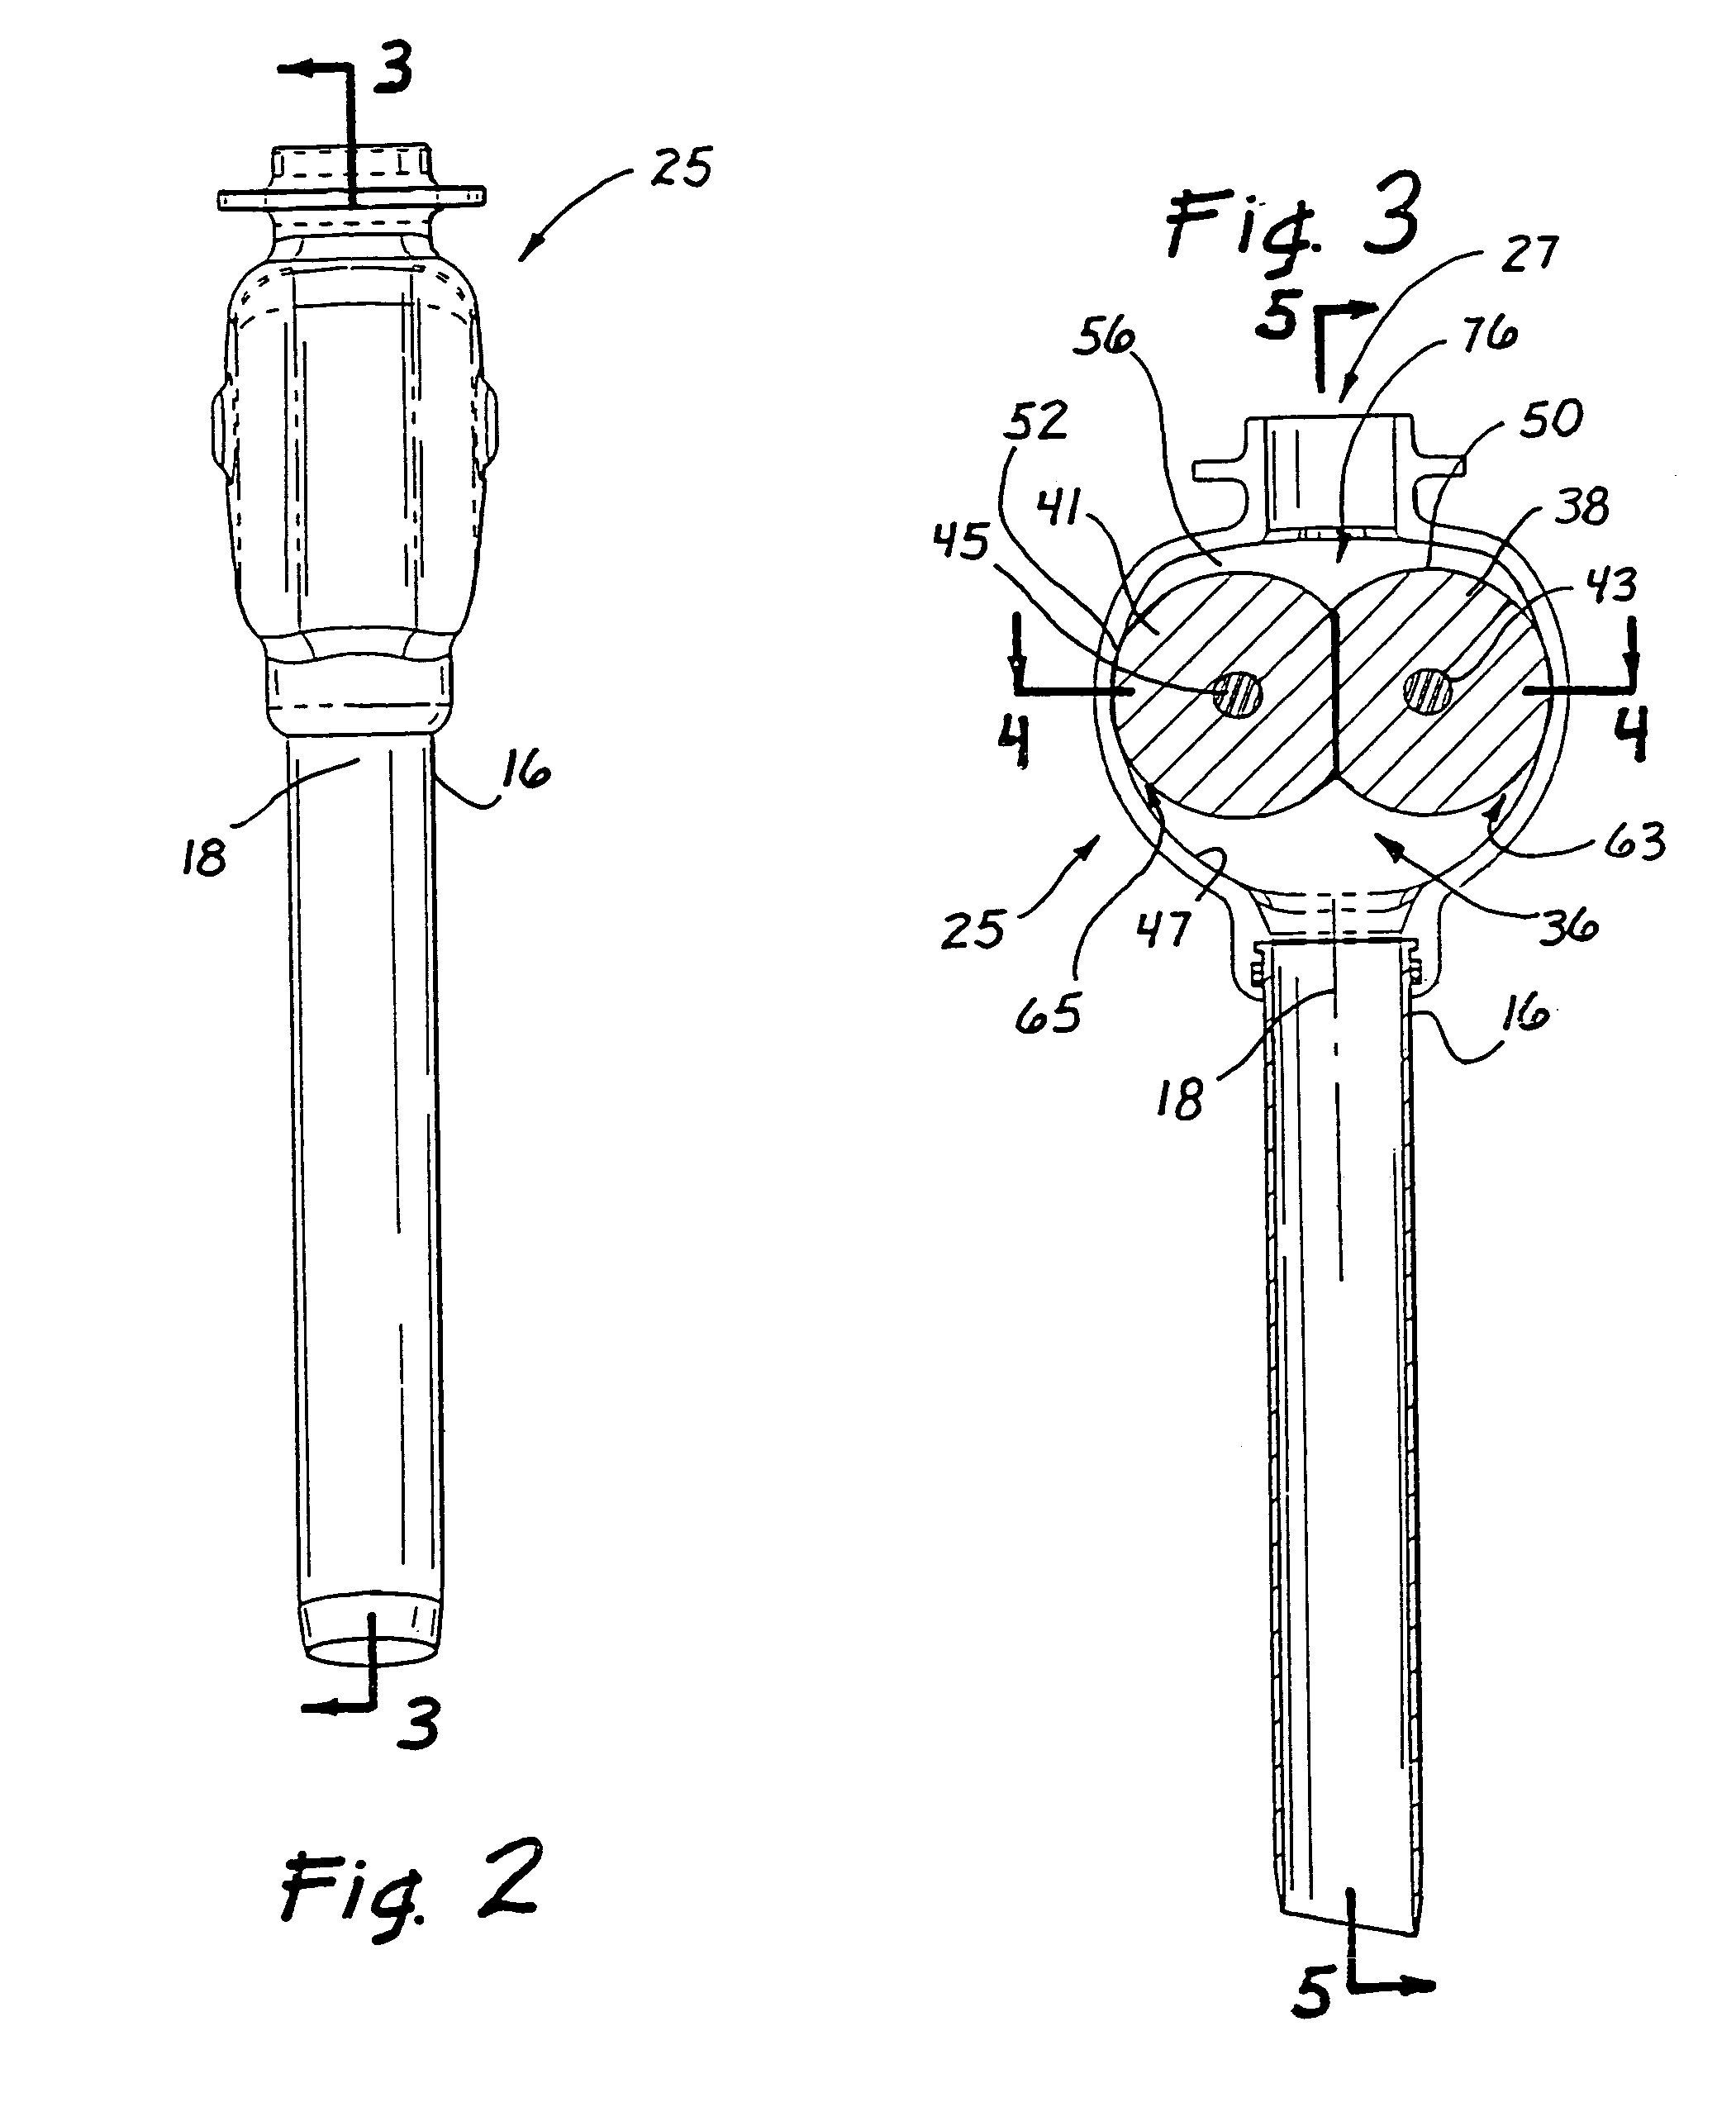 Access device maintenance apparatus and method